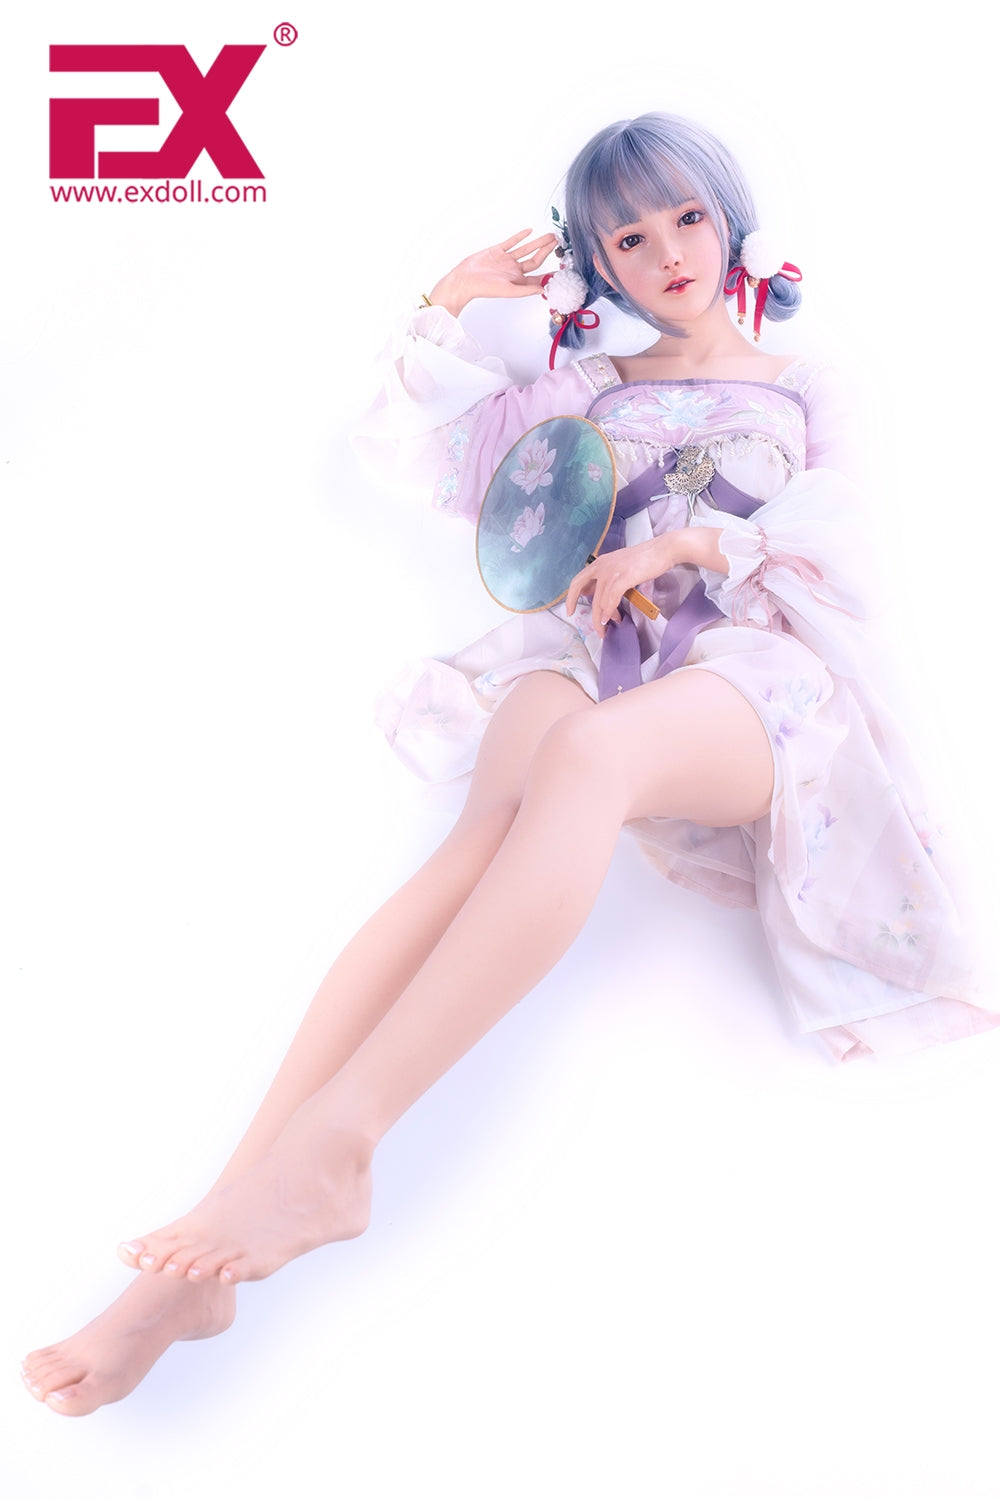 EX Doll Summit Series 149 cm Silicone - Lily | Buy Sex Dolls at DOLLS ACTUALLY